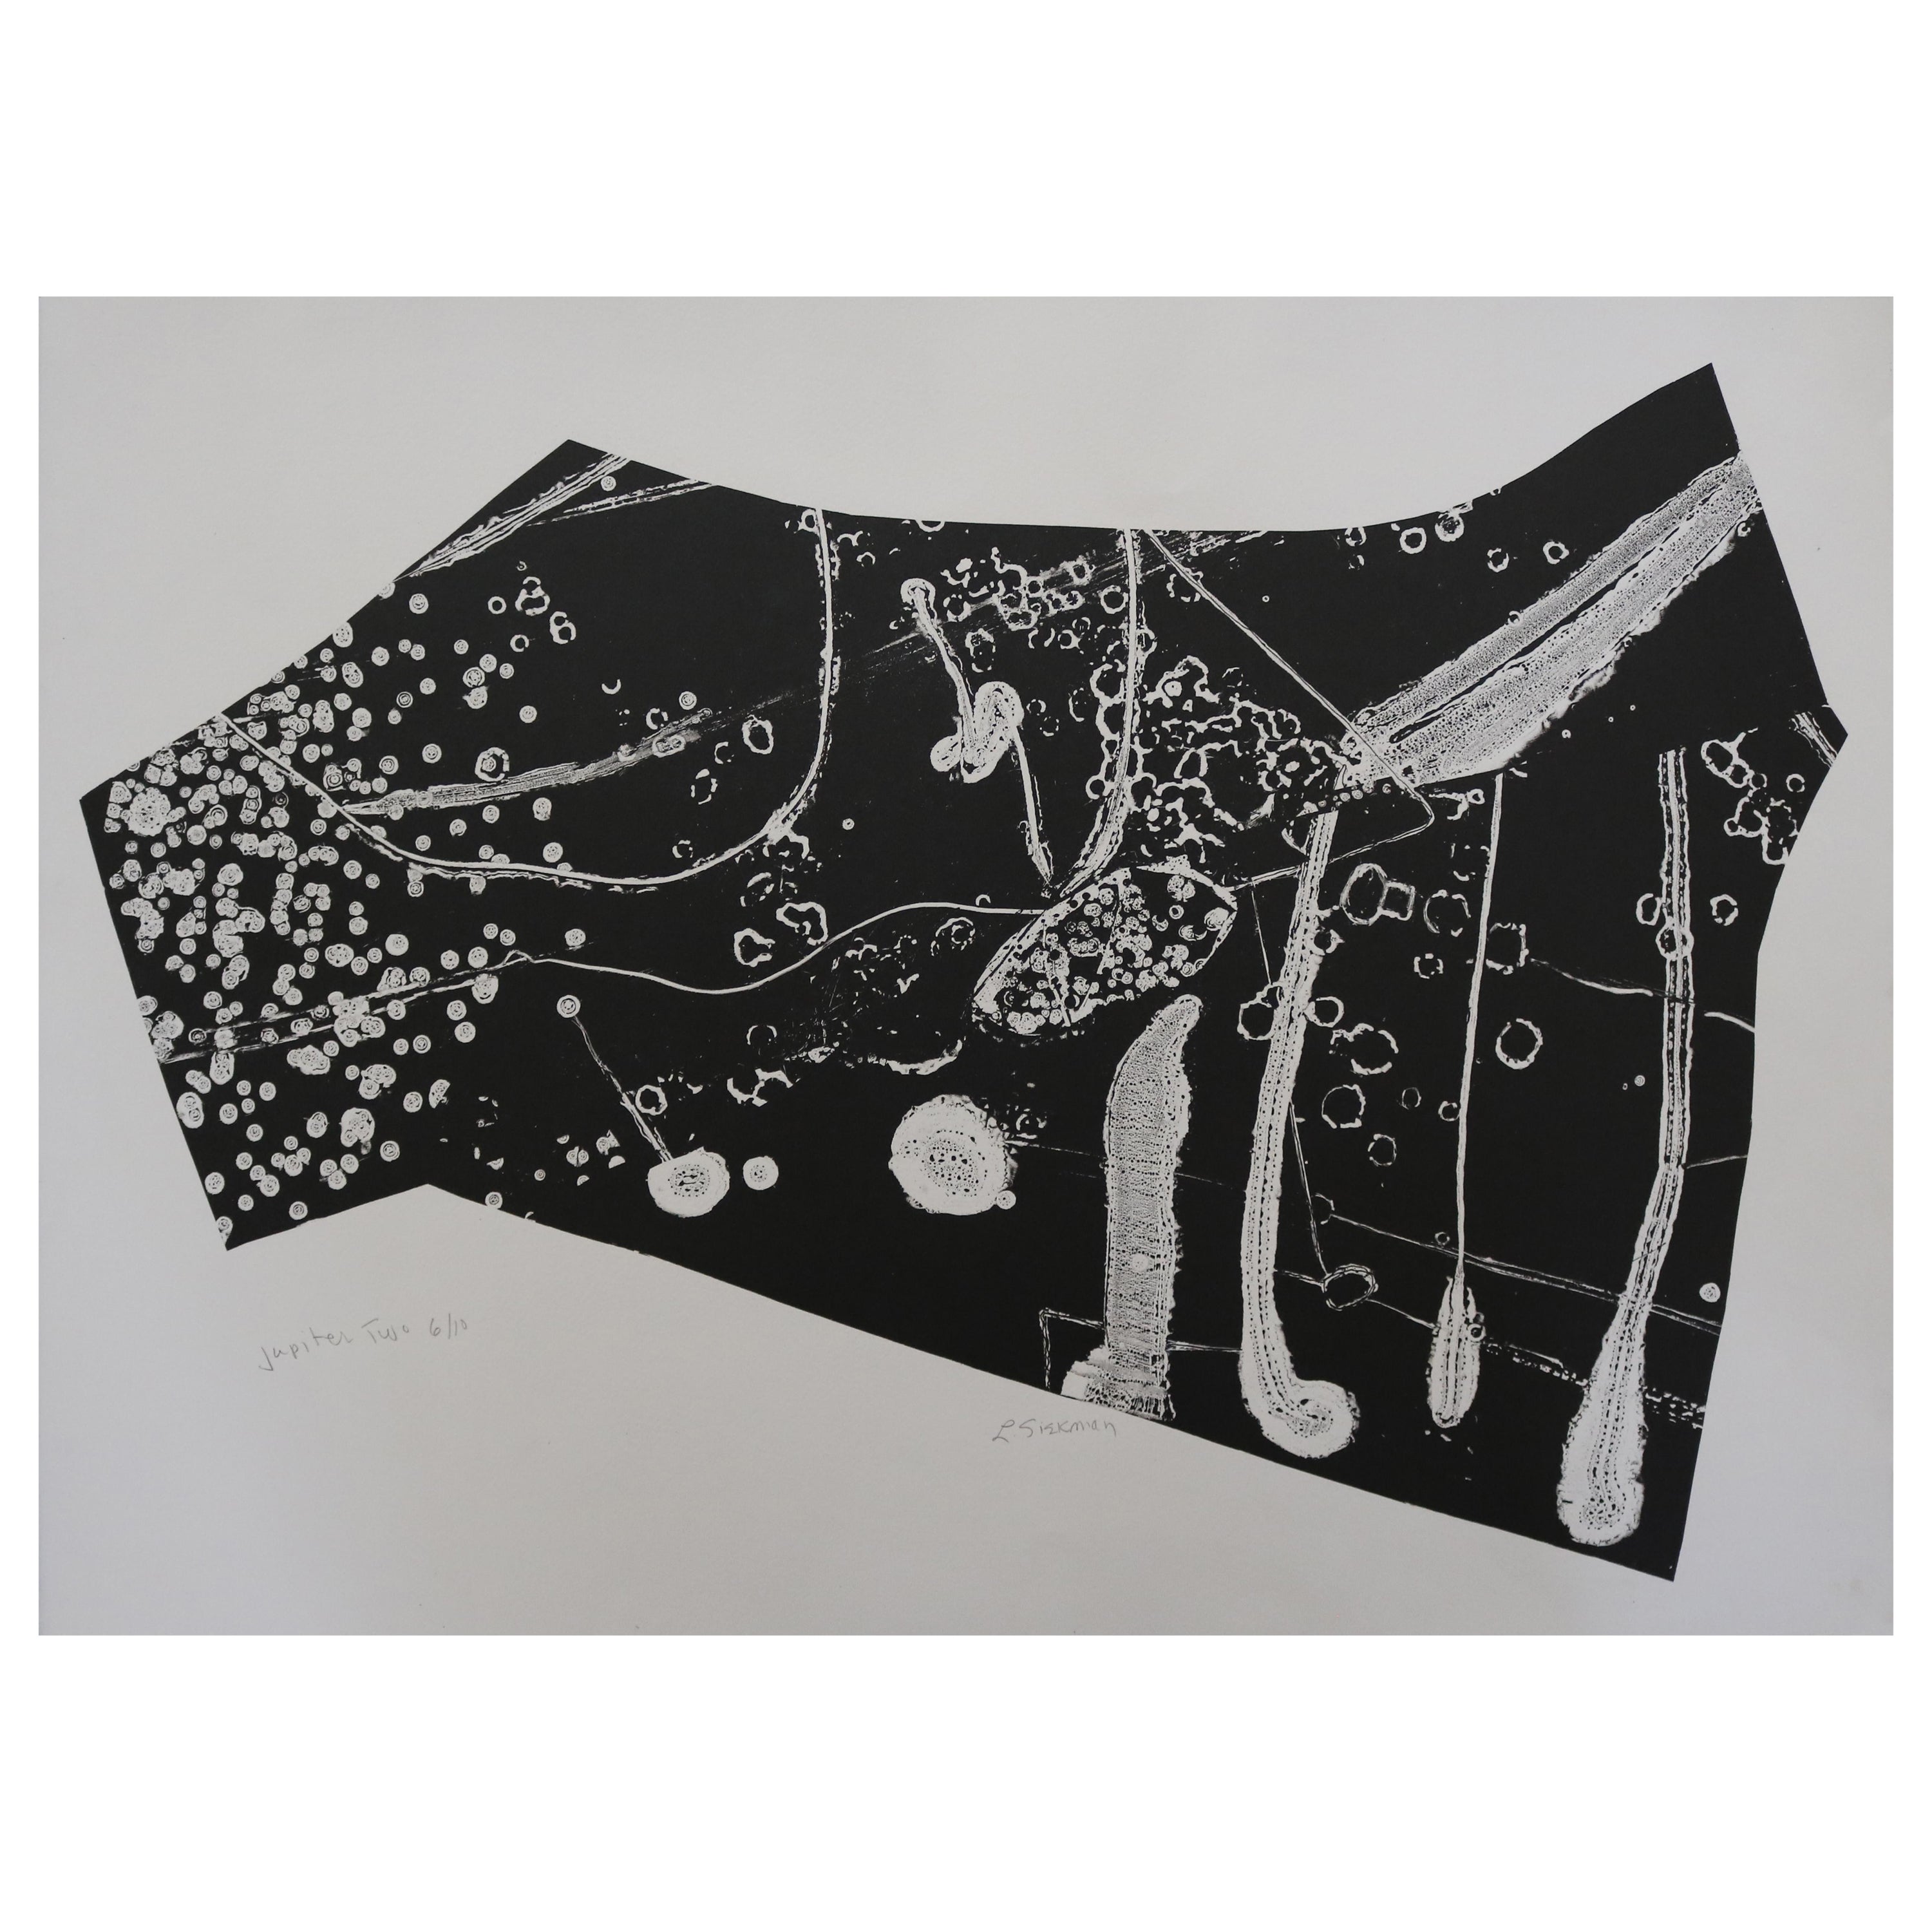 "Jupiter Tujo" Black & White Abstract Lithograph Signed L. Siekman For Sale